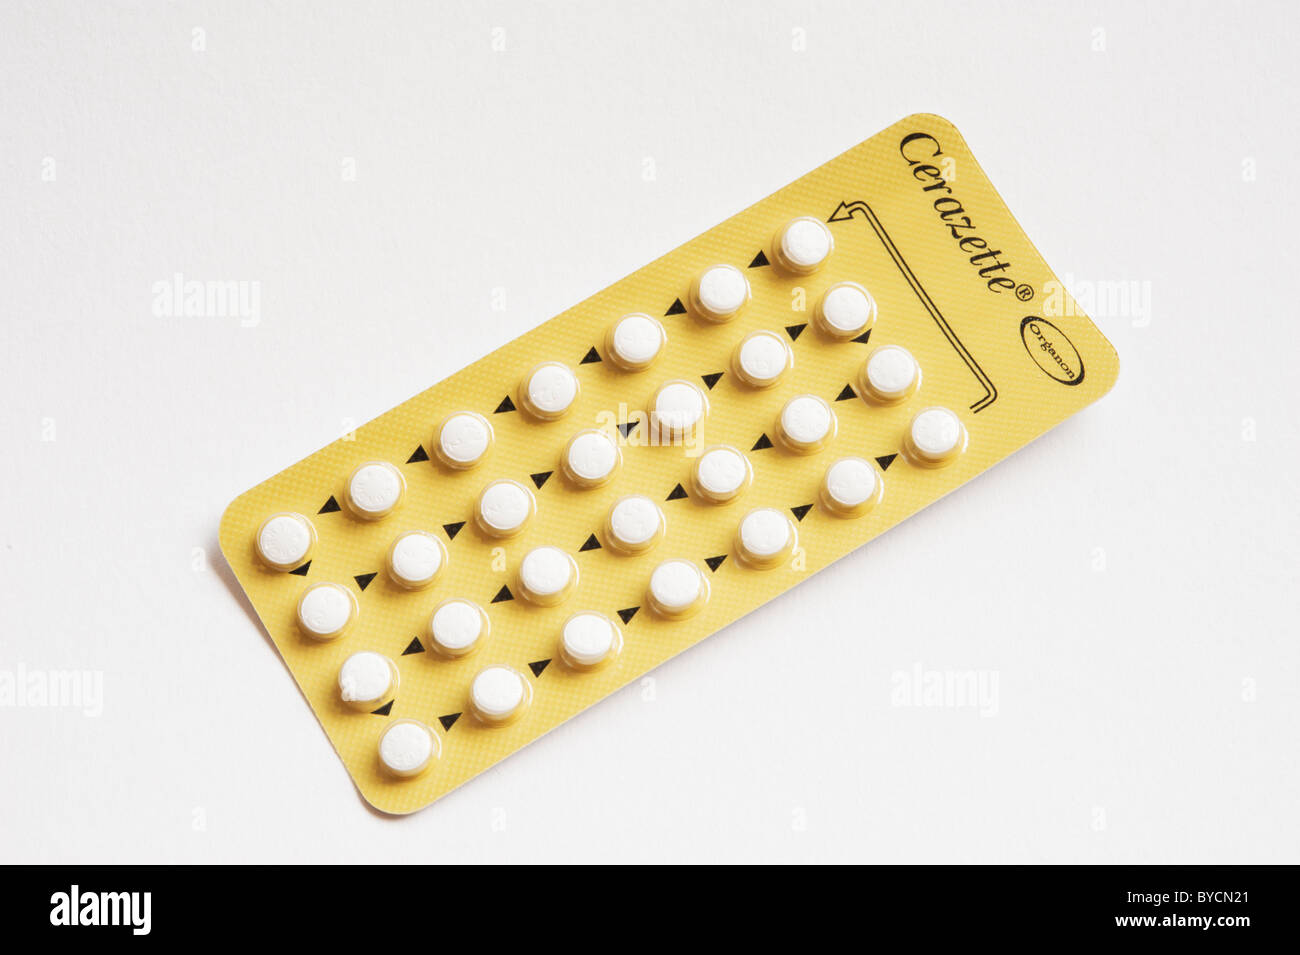 Cerazette - an estrogen-free, progestogen-only oral contraceptive pill - isolated on a white background. Stock Photo